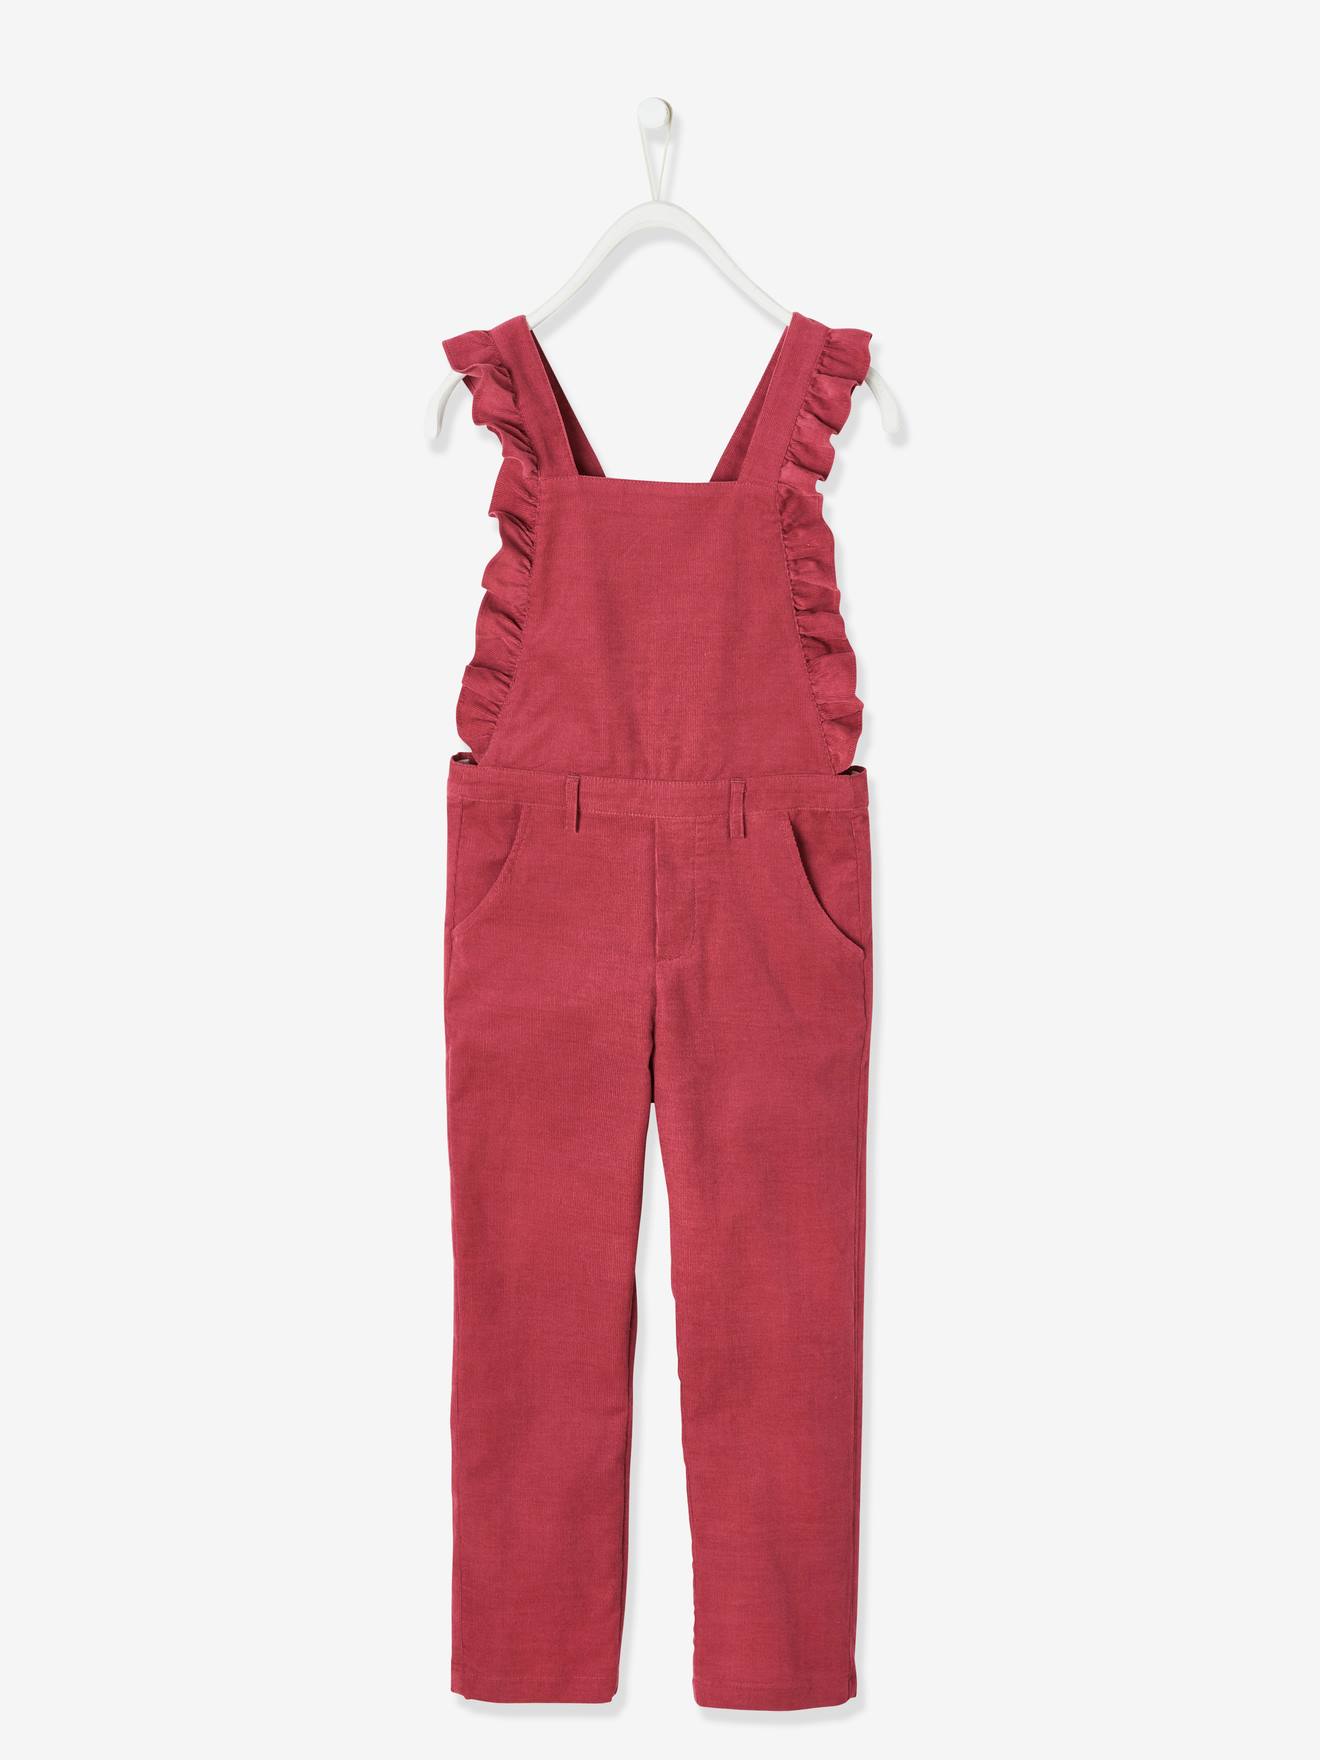 C&A baby-romper Pink discount 88% KIDS FASHION Baby Jumpsuits & Dungarees Corduroy 